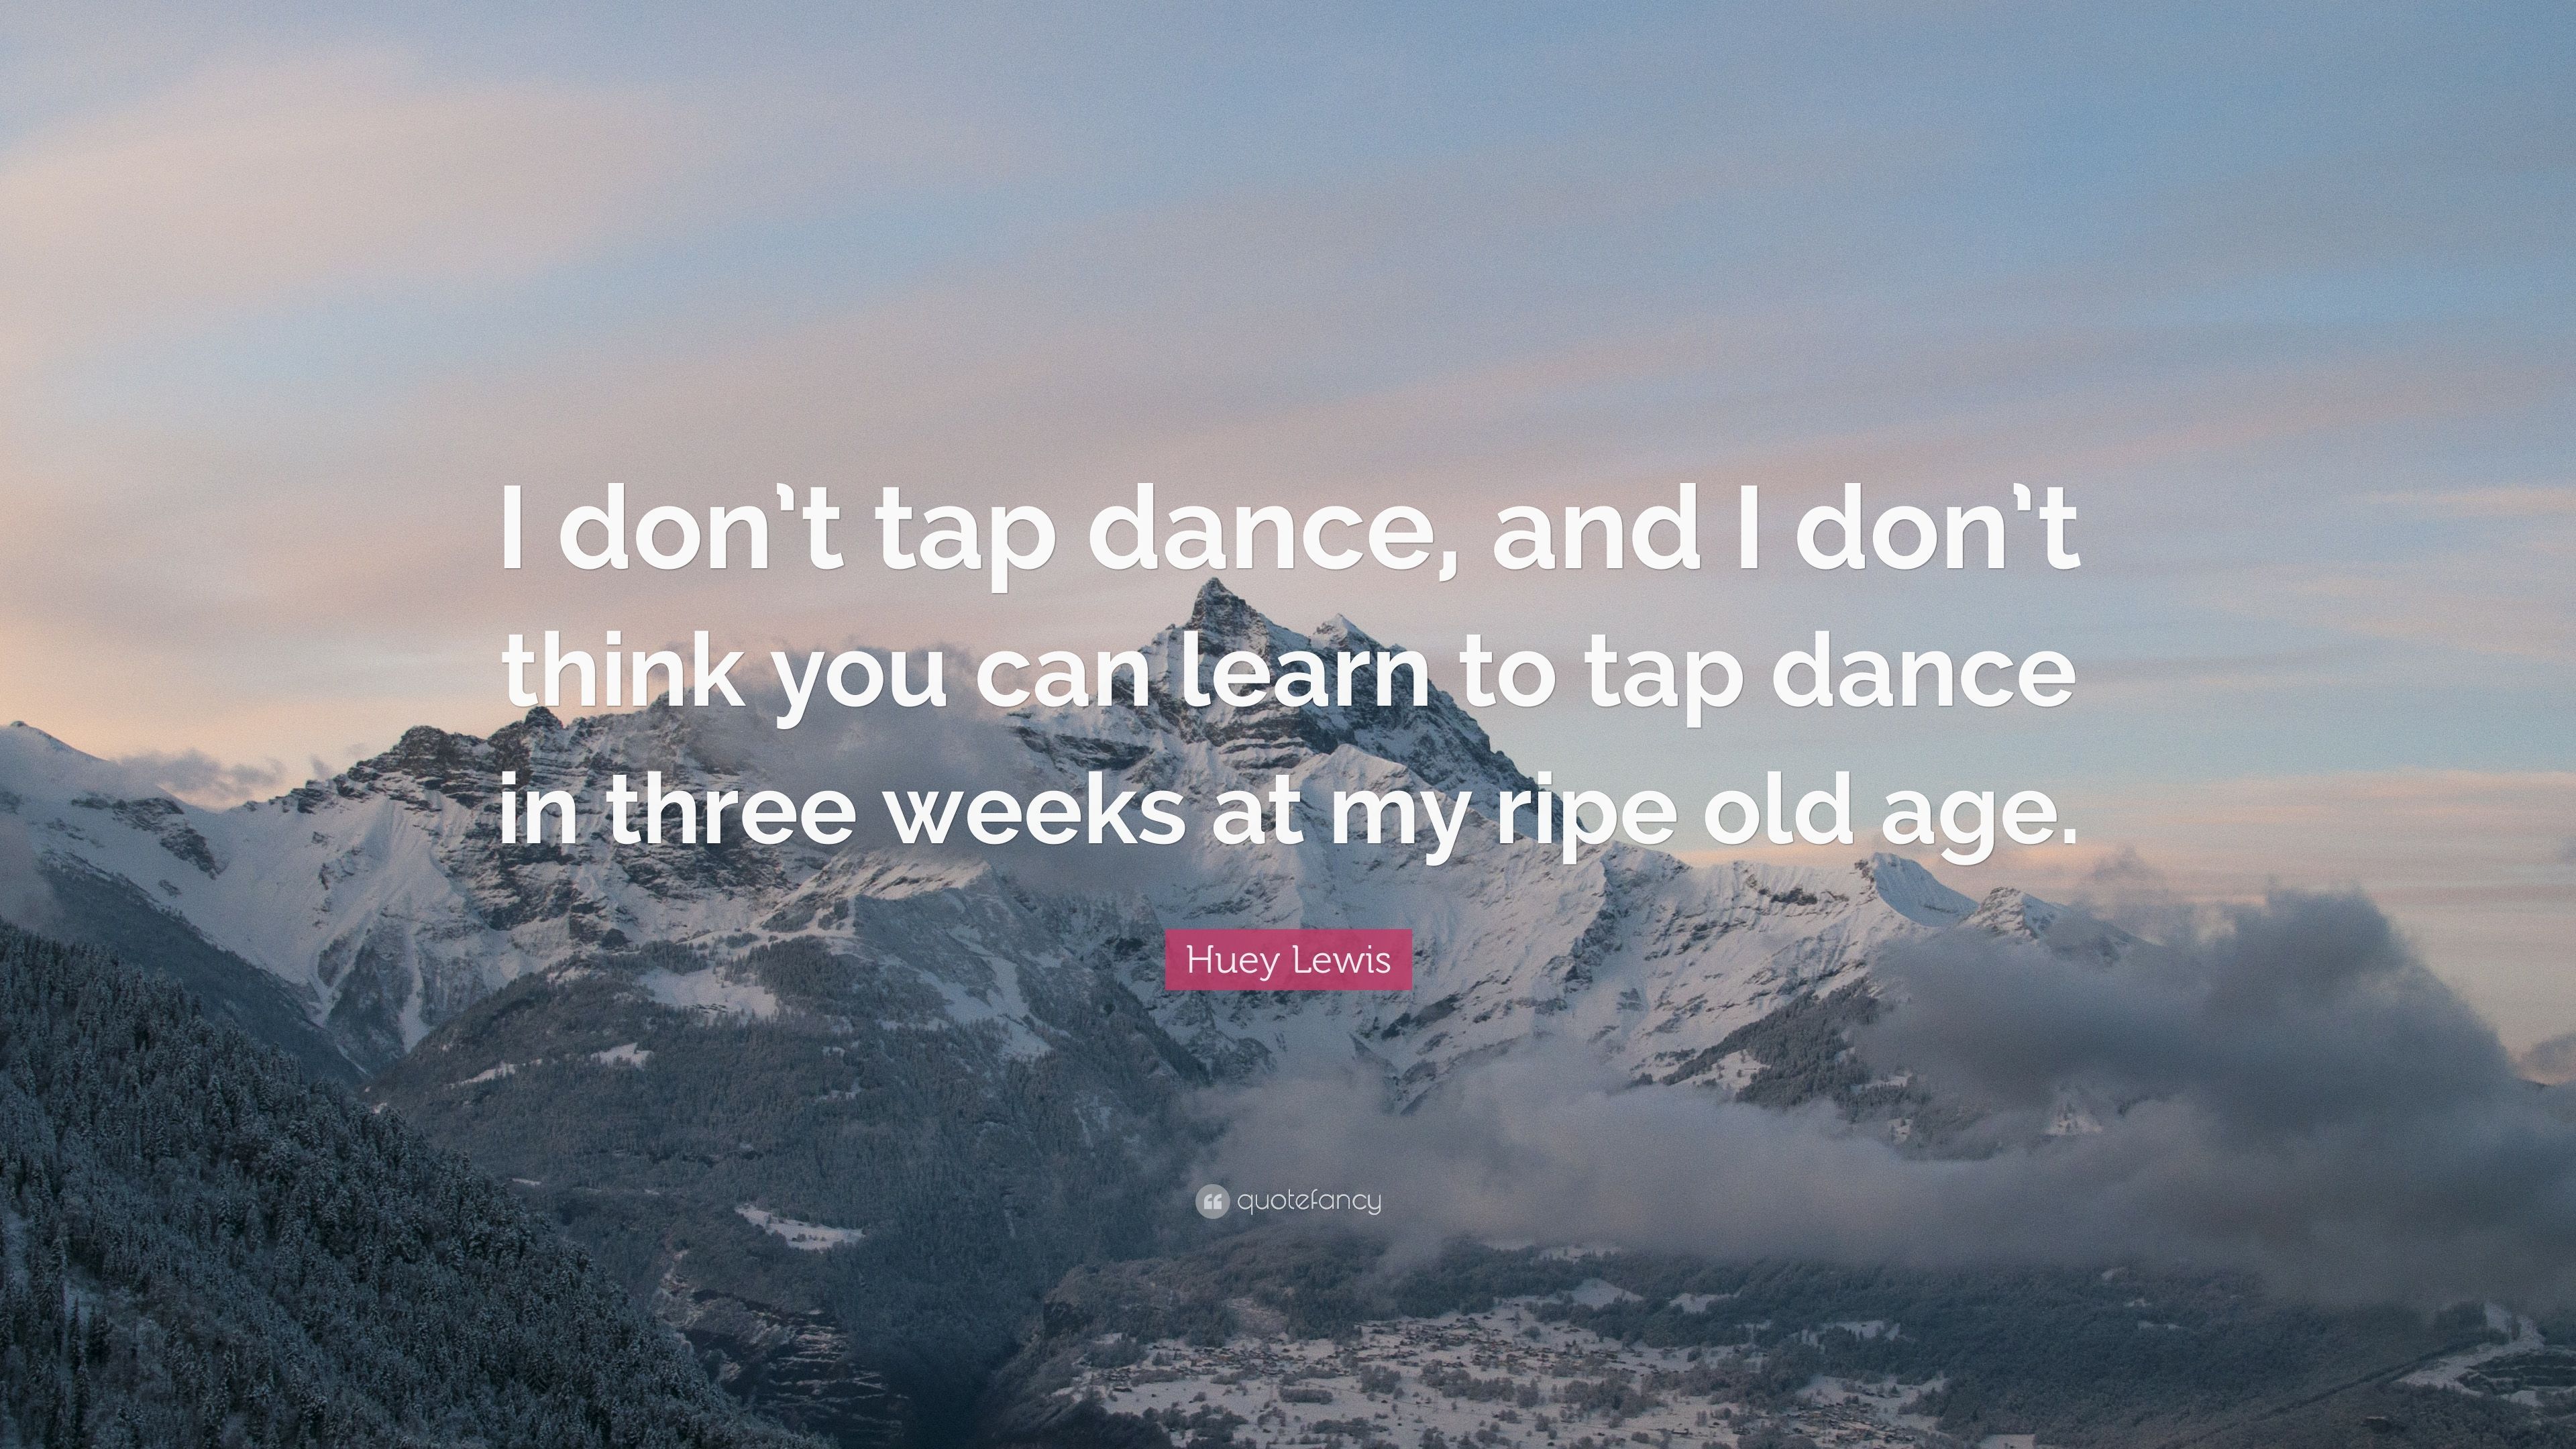 Huey Lewis Quote: “I don't tap dance, and I don't think you can